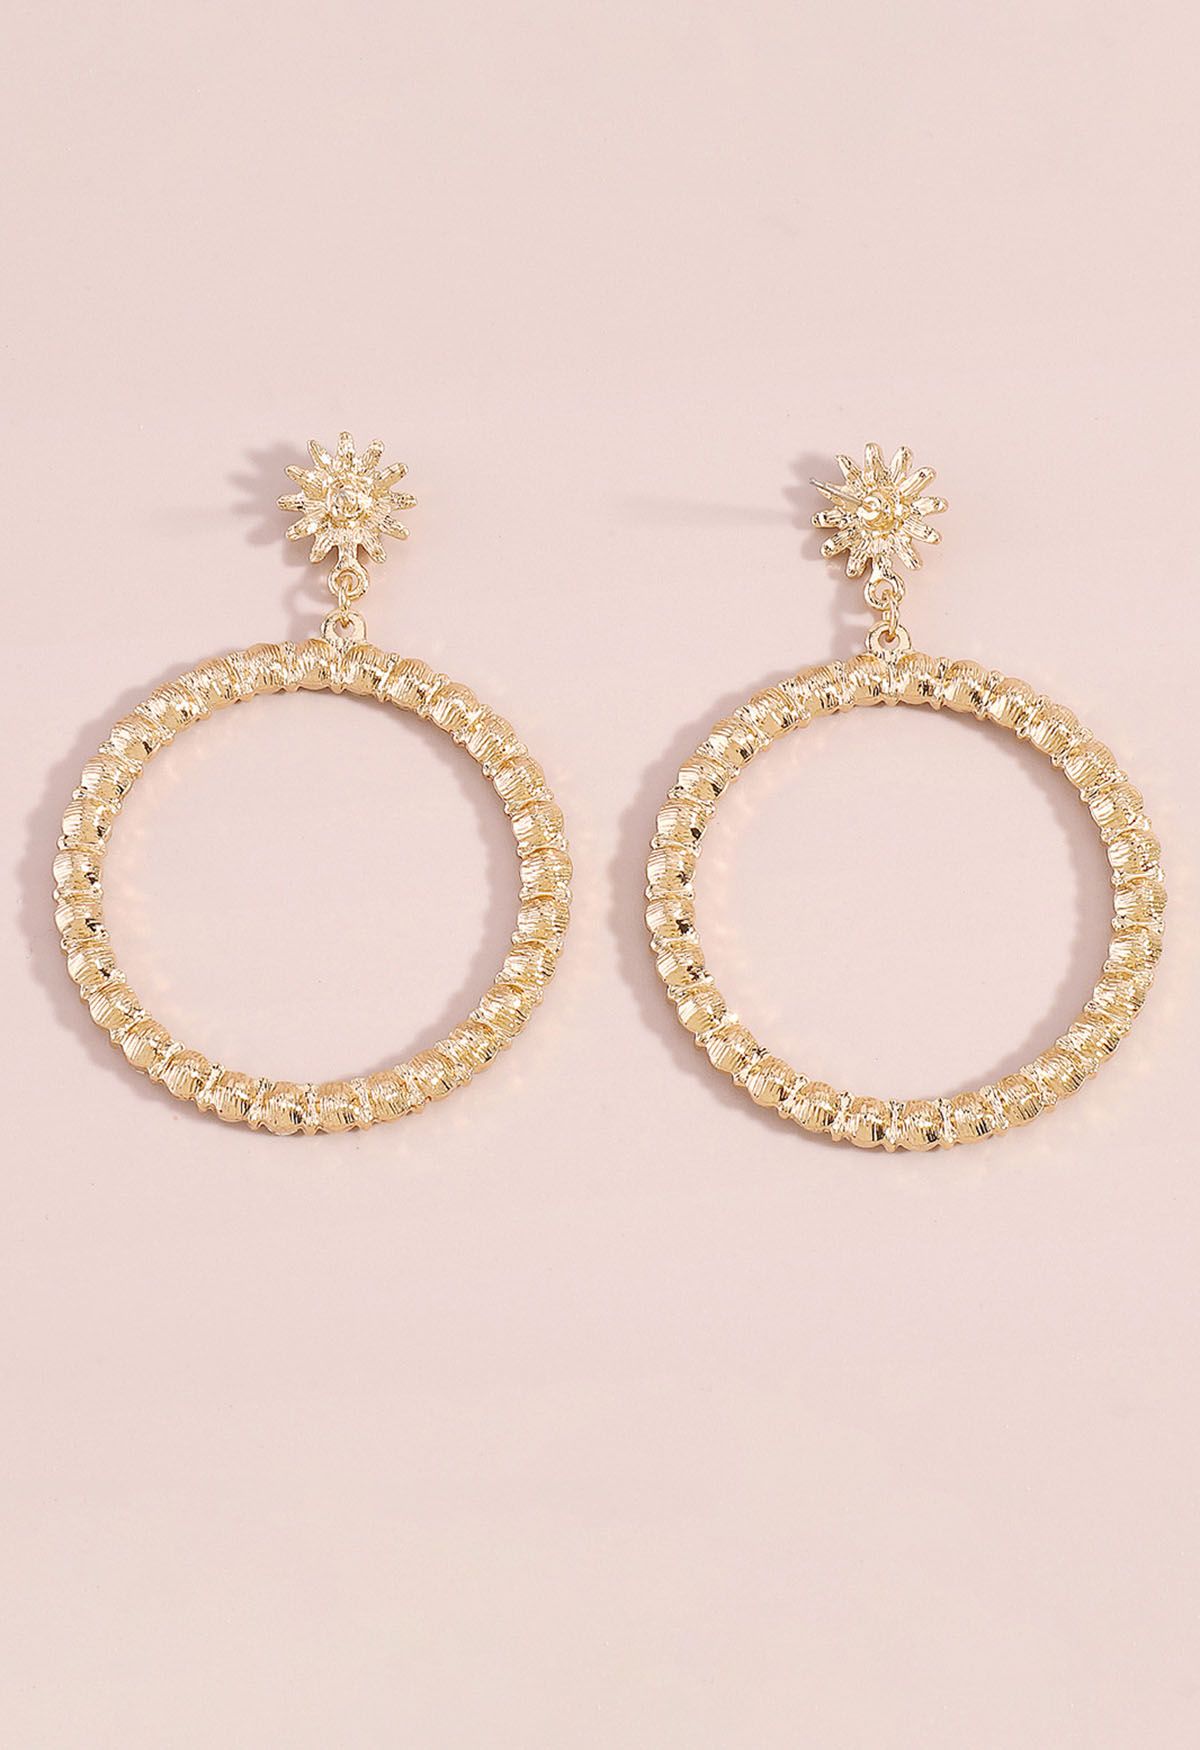 Hollow Out Circle Rhinestone Earrings in Gold